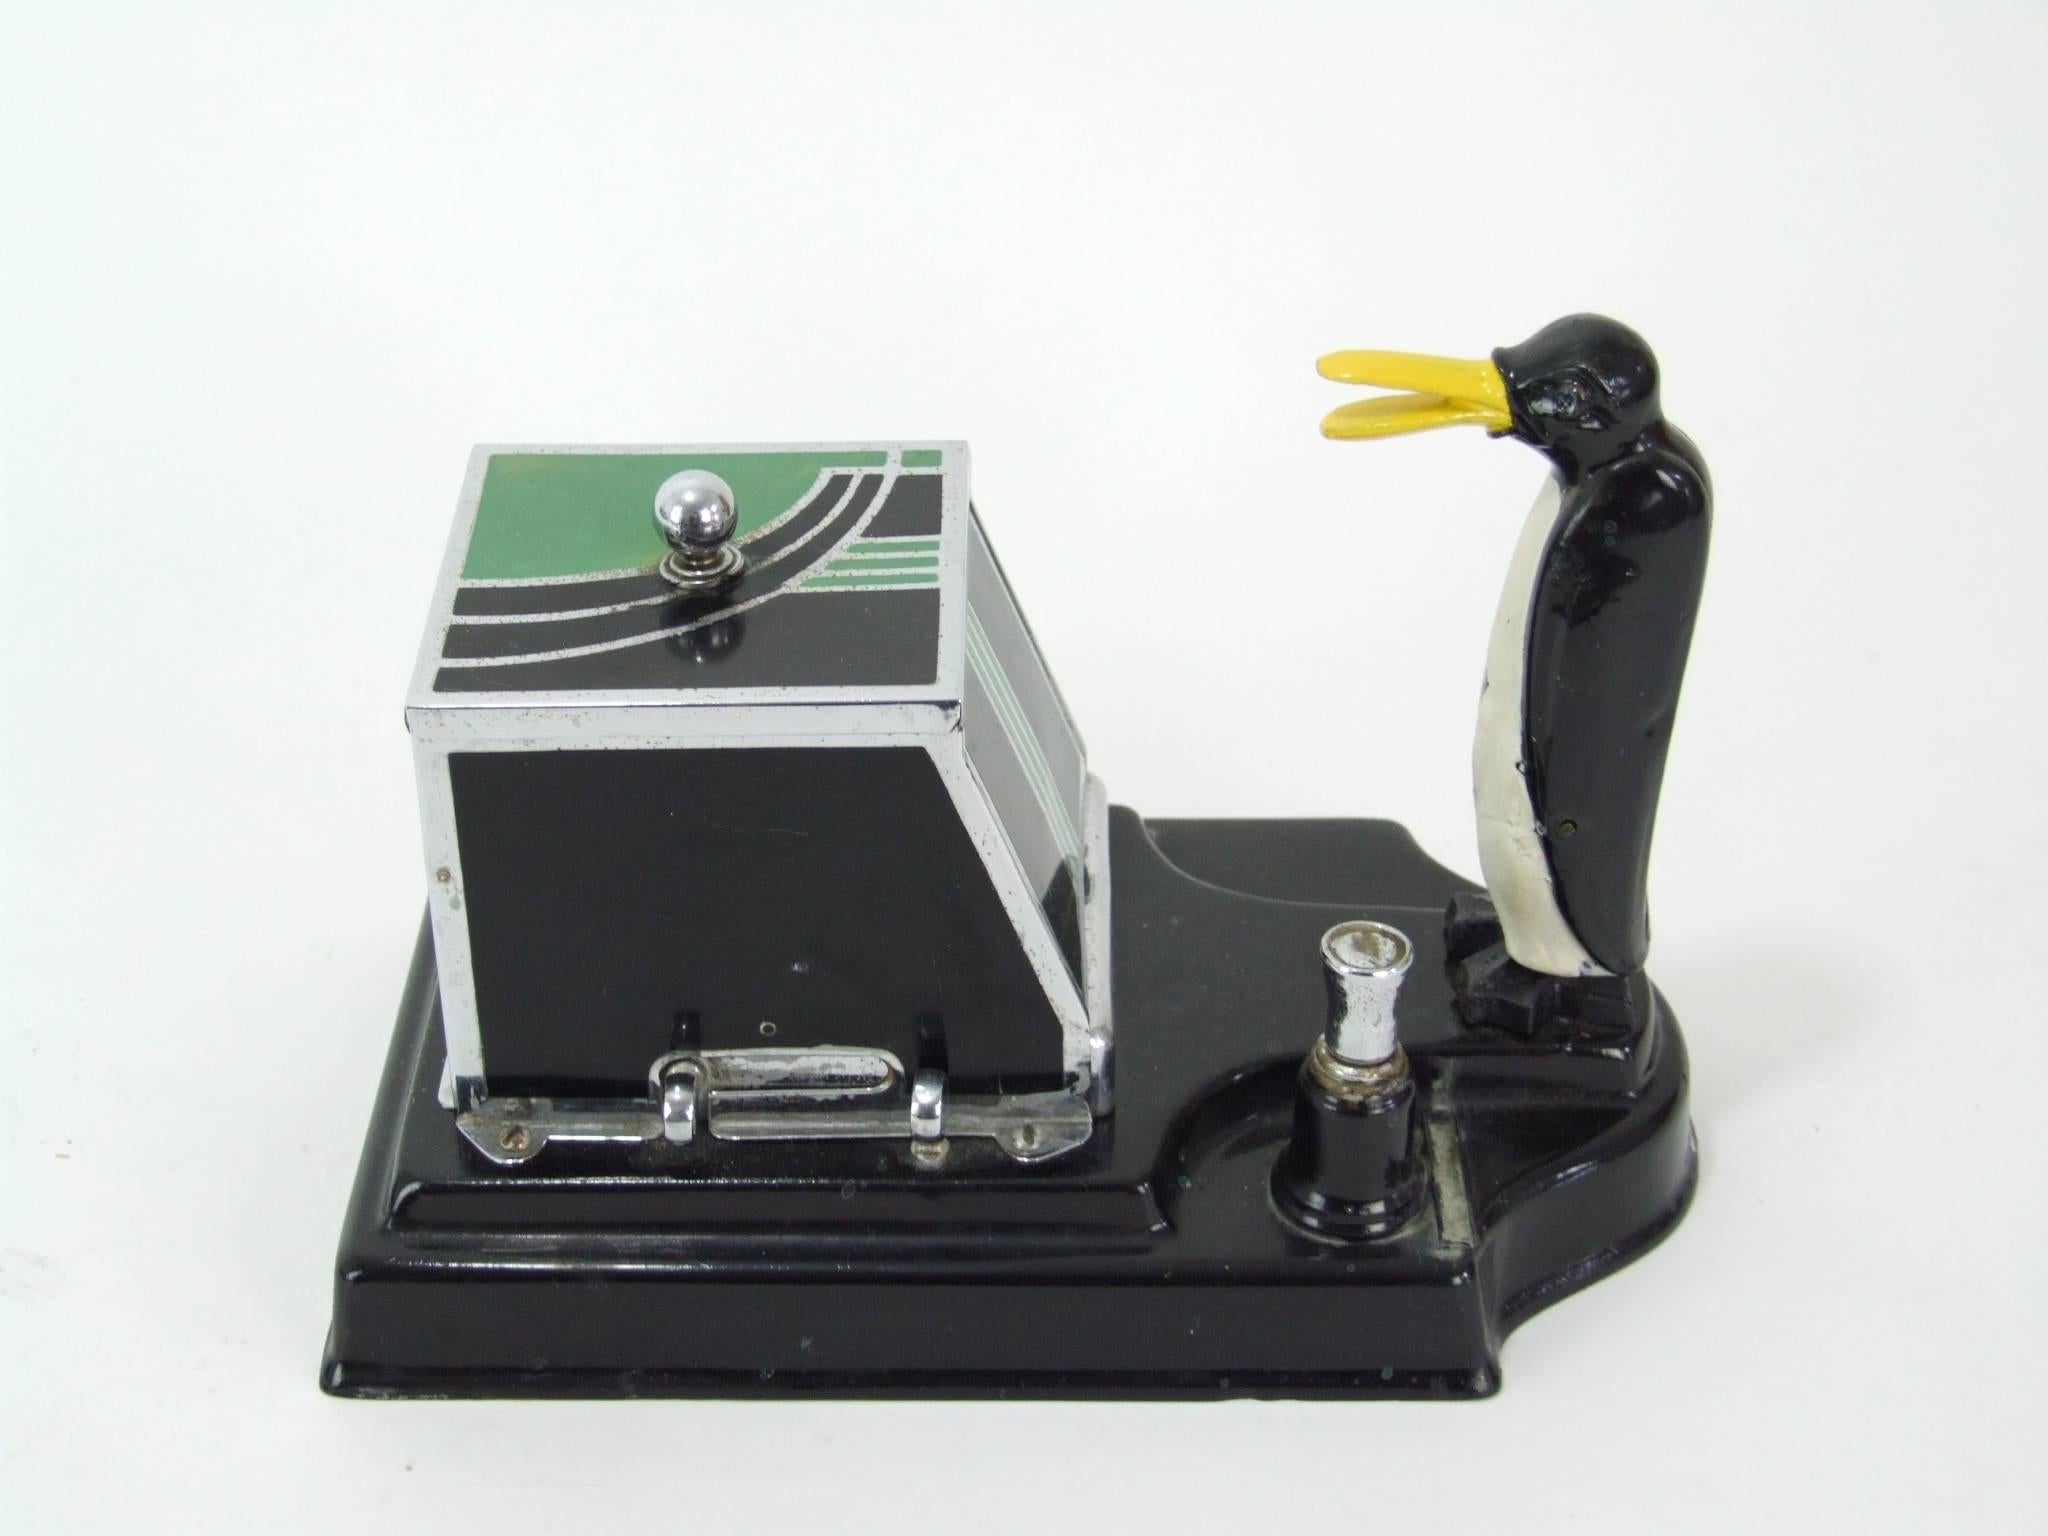 A strike-lite penguin cigarette box and lighter with black and green enamel box, chrome knob and black metal base, circa 1934. The Penguin is rarer than the monkey version. Squeeze the levers to the front and the penguin will pick up a cigarette